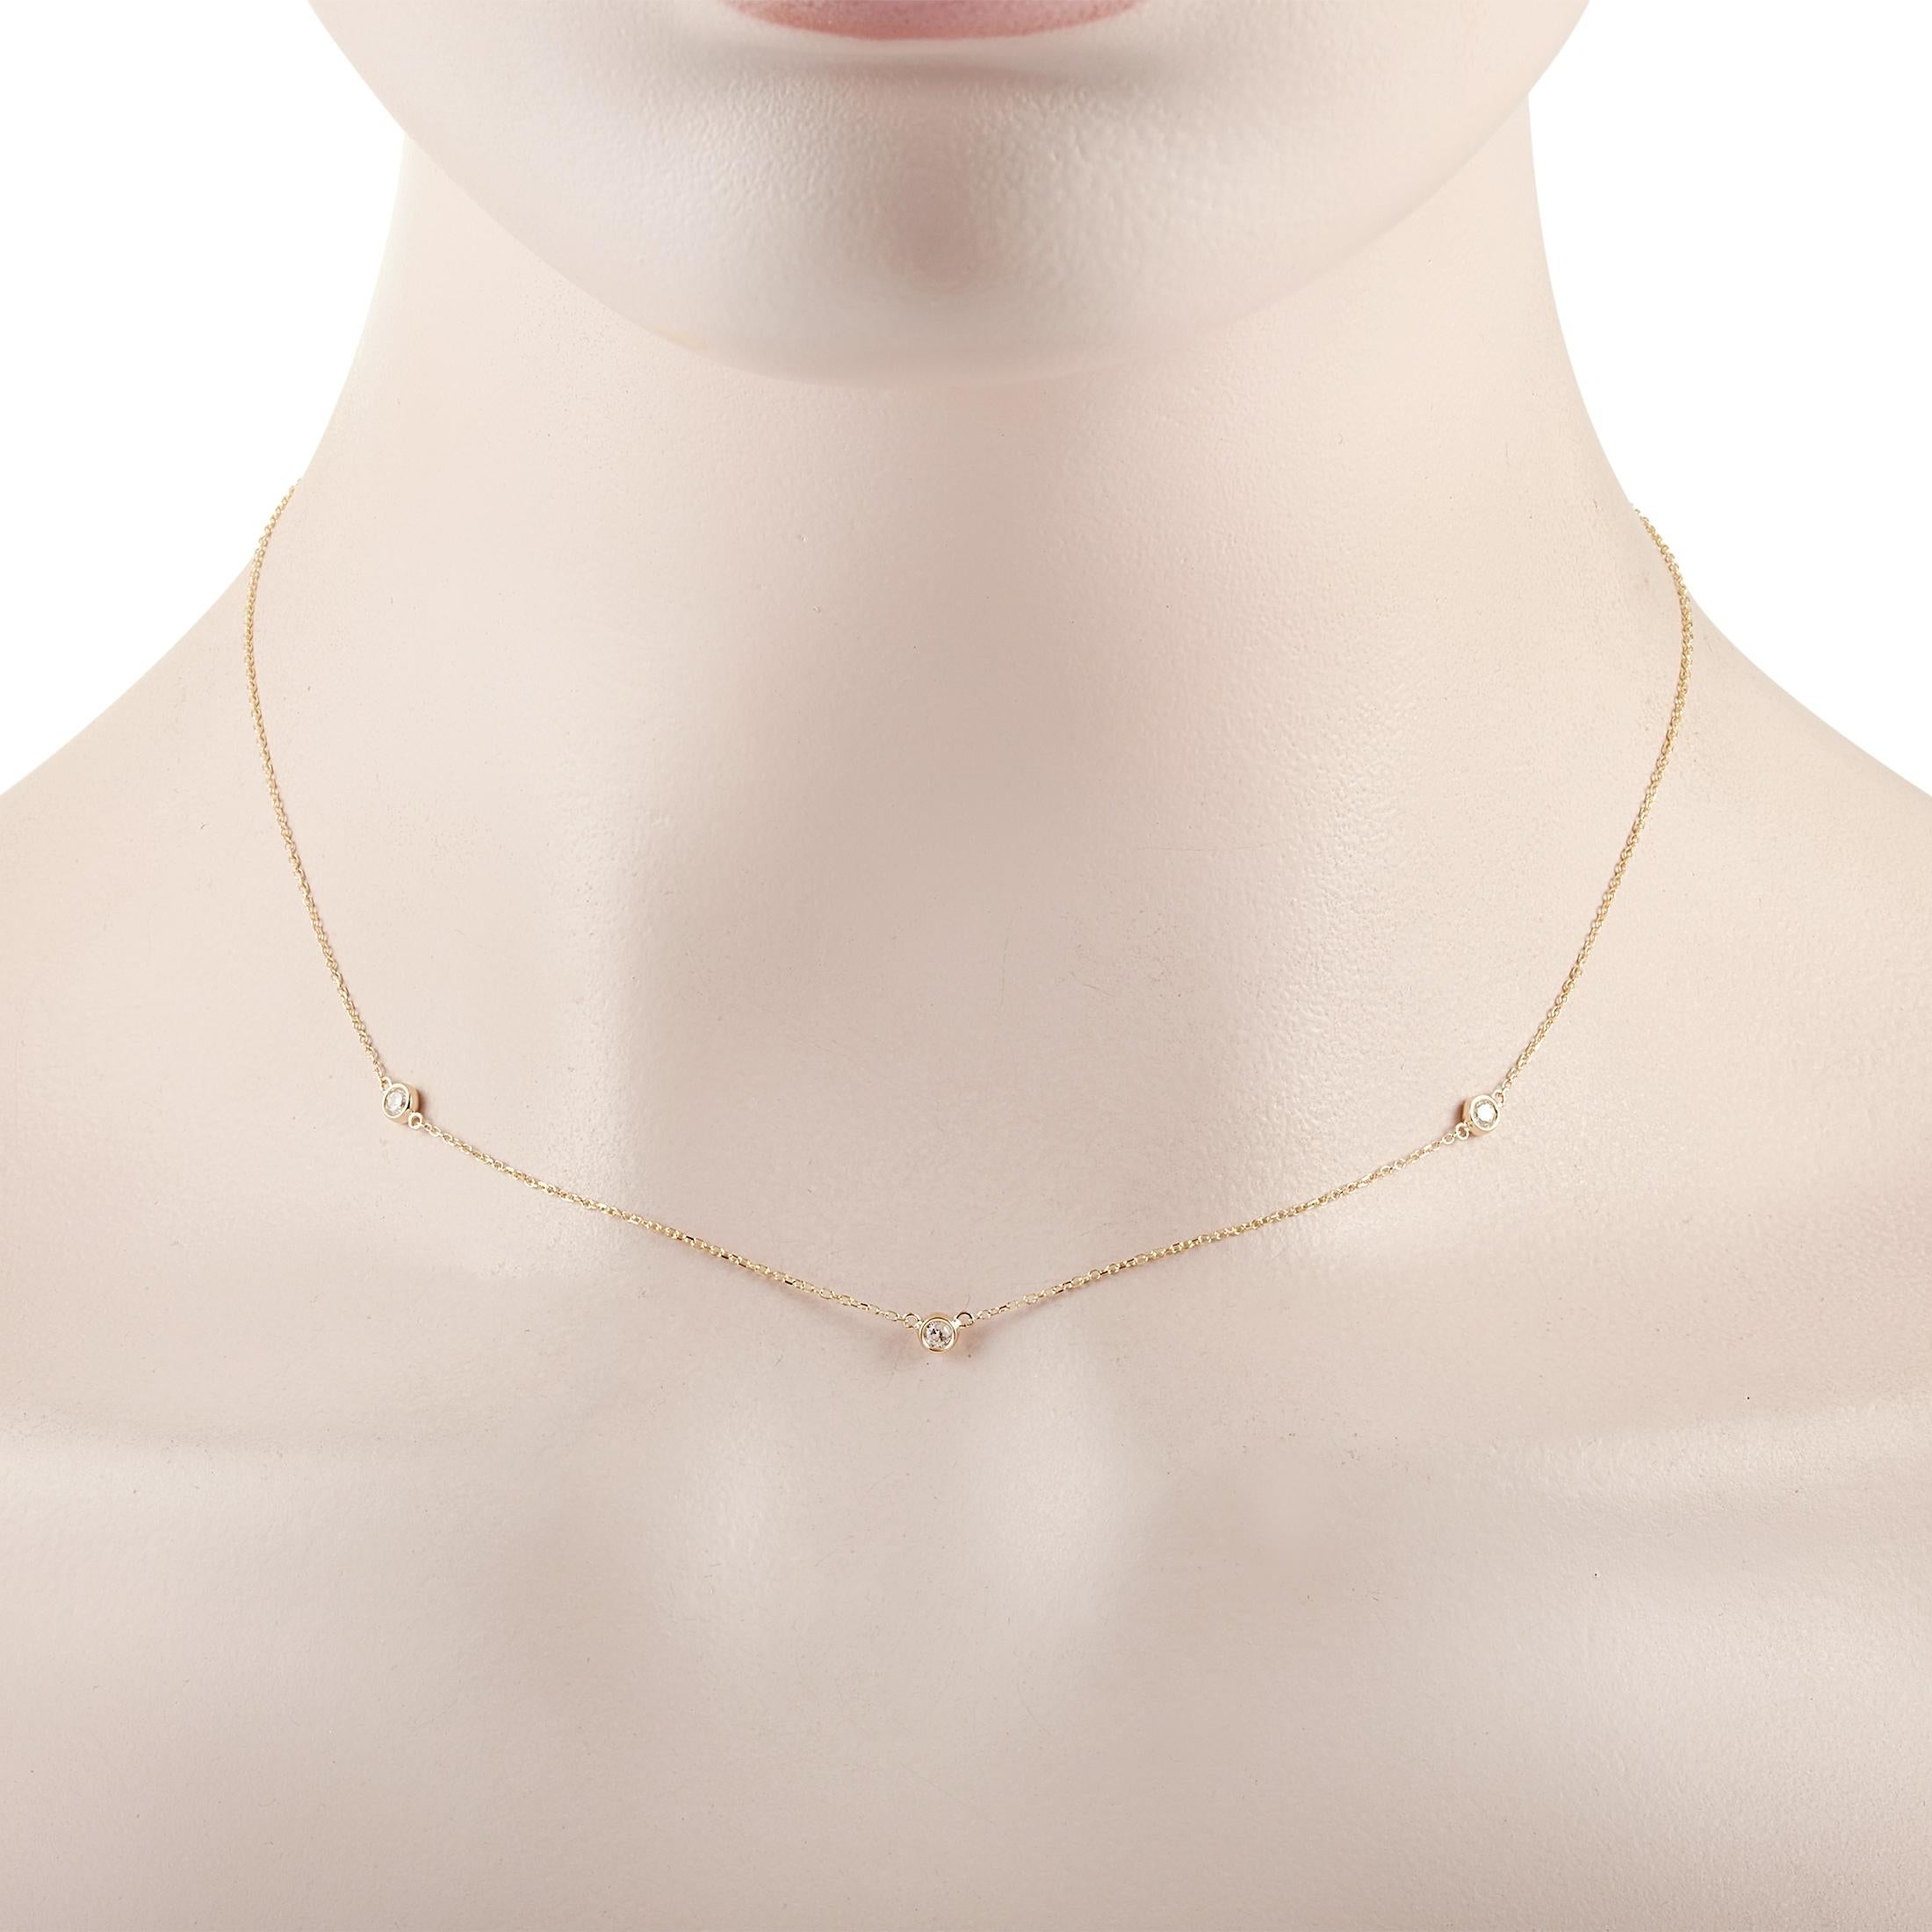 This LB Exclusive necklace is crafted from 14K yellow gold and weighs 1.3 grams, measuring 16” in length. The necklace is set with diamonds that total 0.15 carats.
 
 Offered in brand new condition, this jewelry piece includes a gift box.